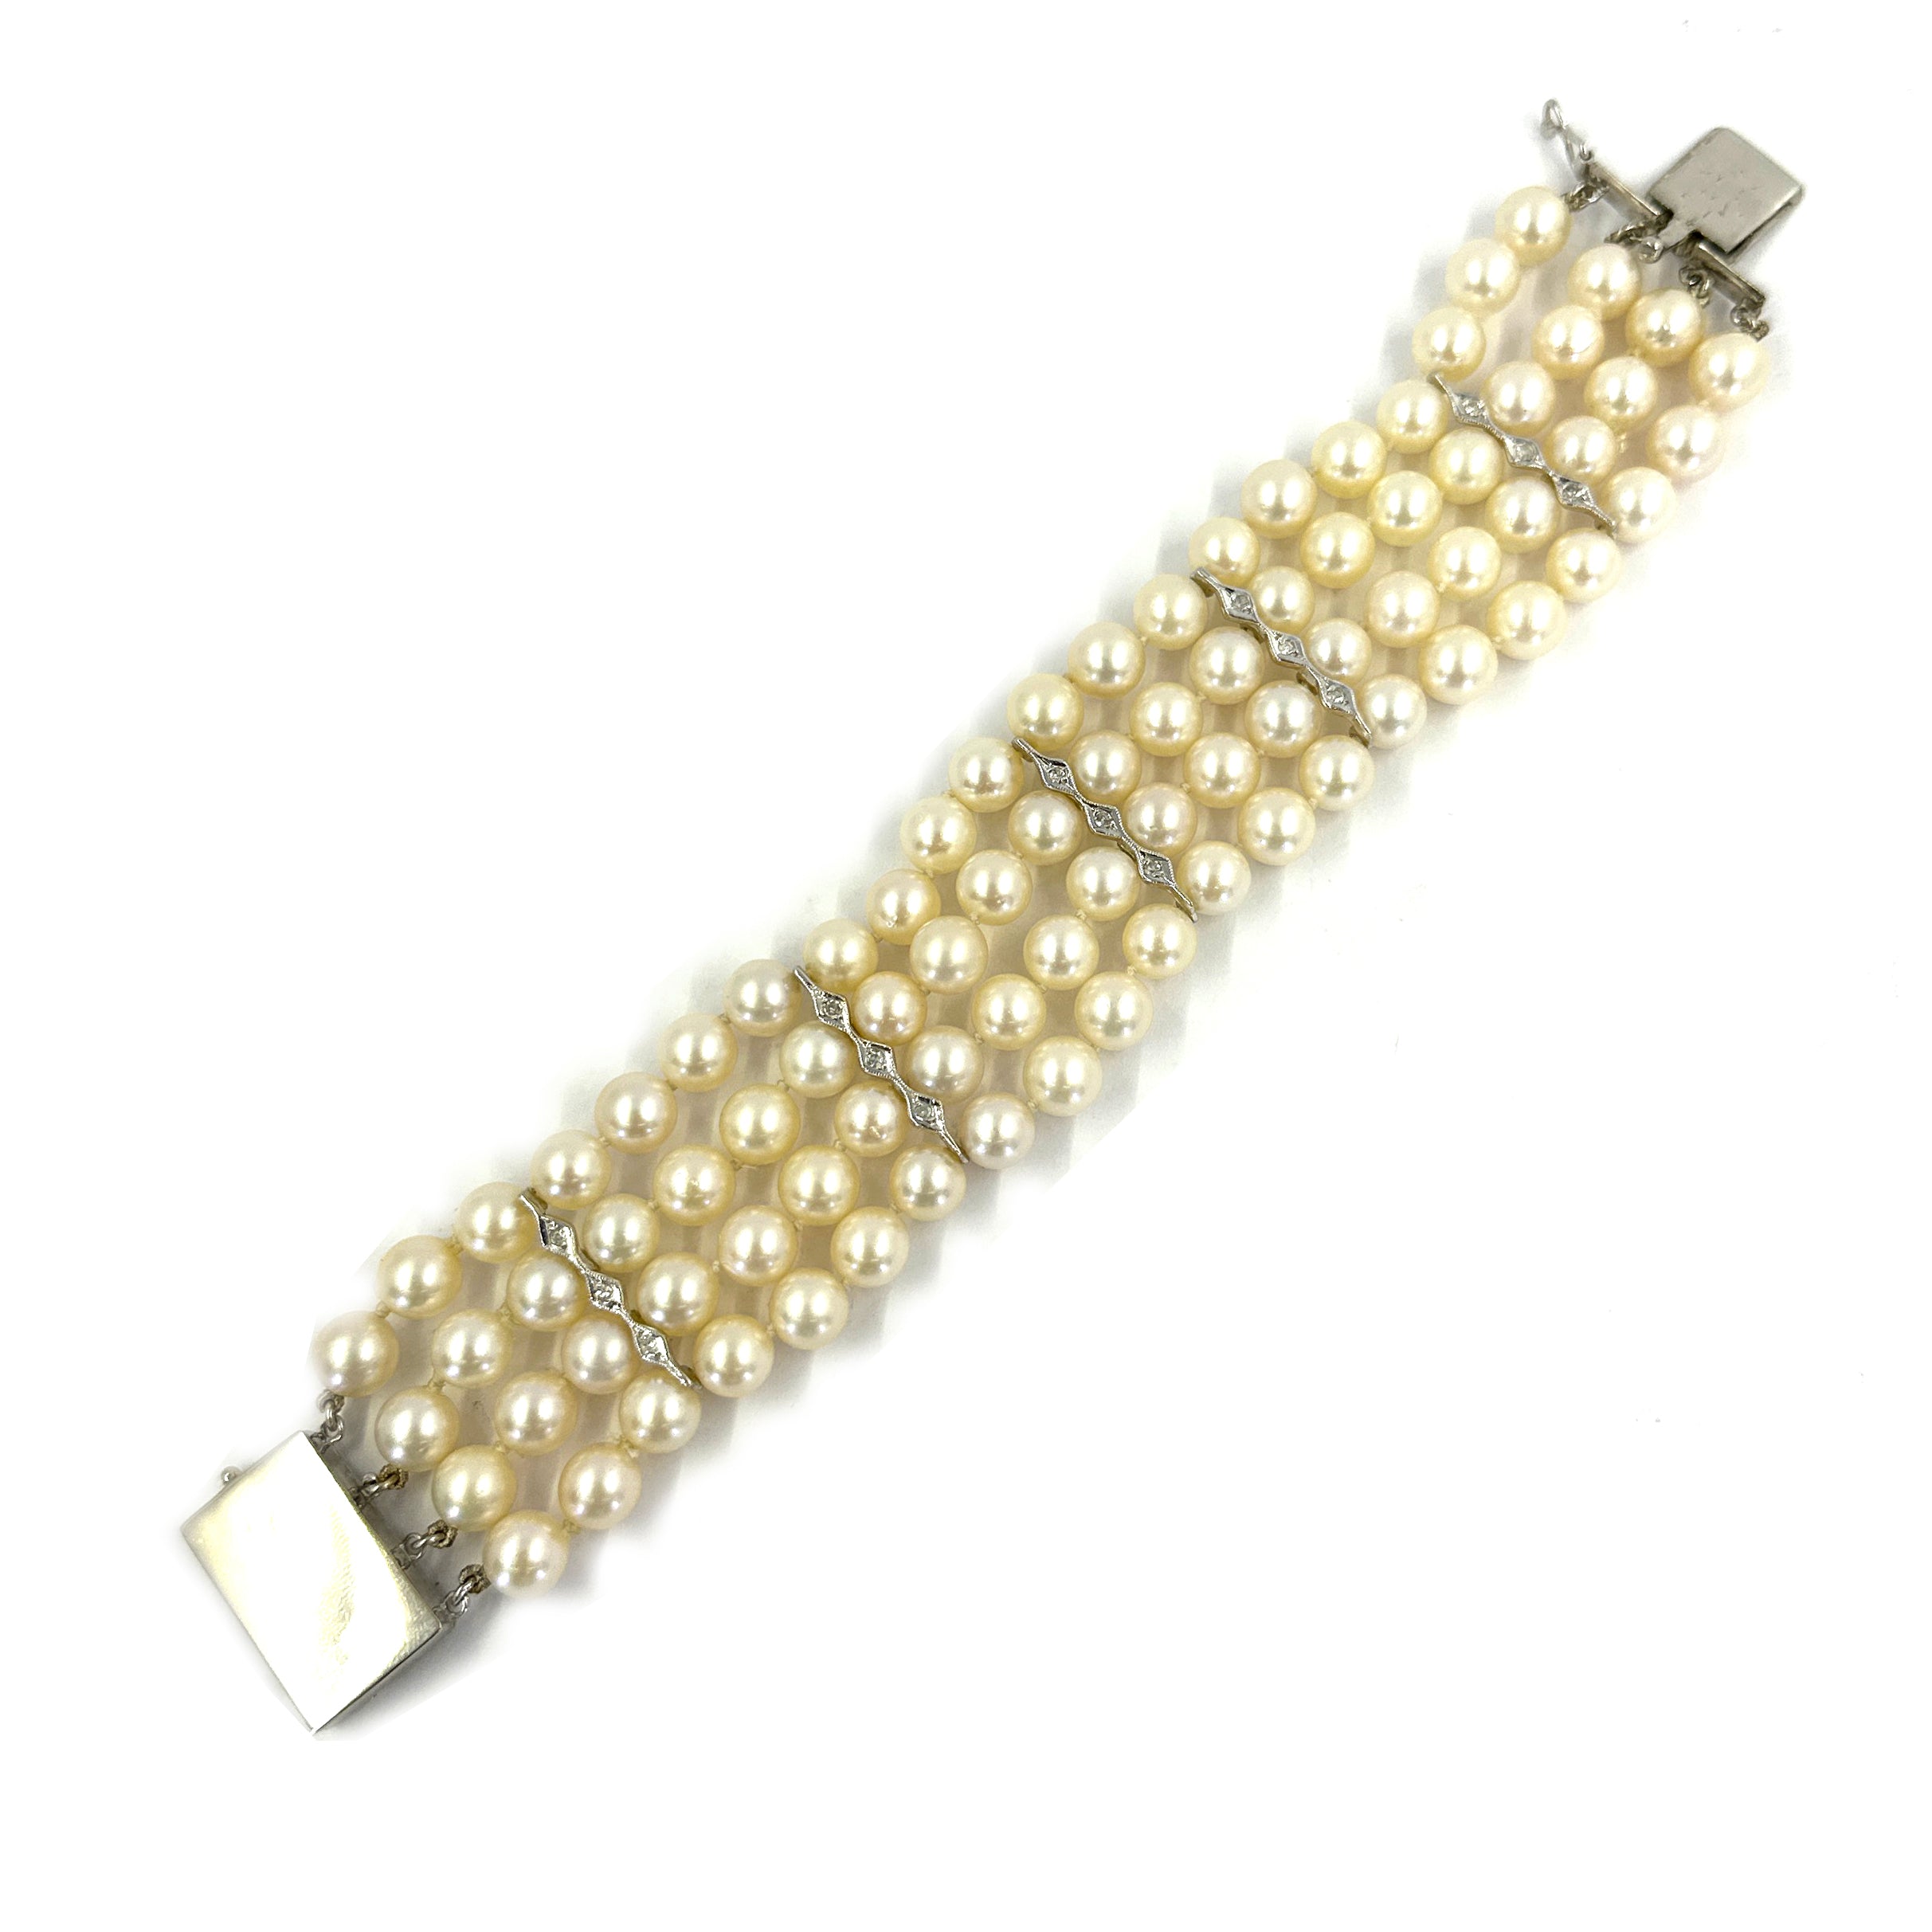 Amazon.com: Natural Pearl Beads 100% Natural Freshwater Round White Pearl  Loose Beads (2 Strands) Punching 4-5mm one Strand 14.2 inch for Jewelry  Making Necklace Bracelet Charms